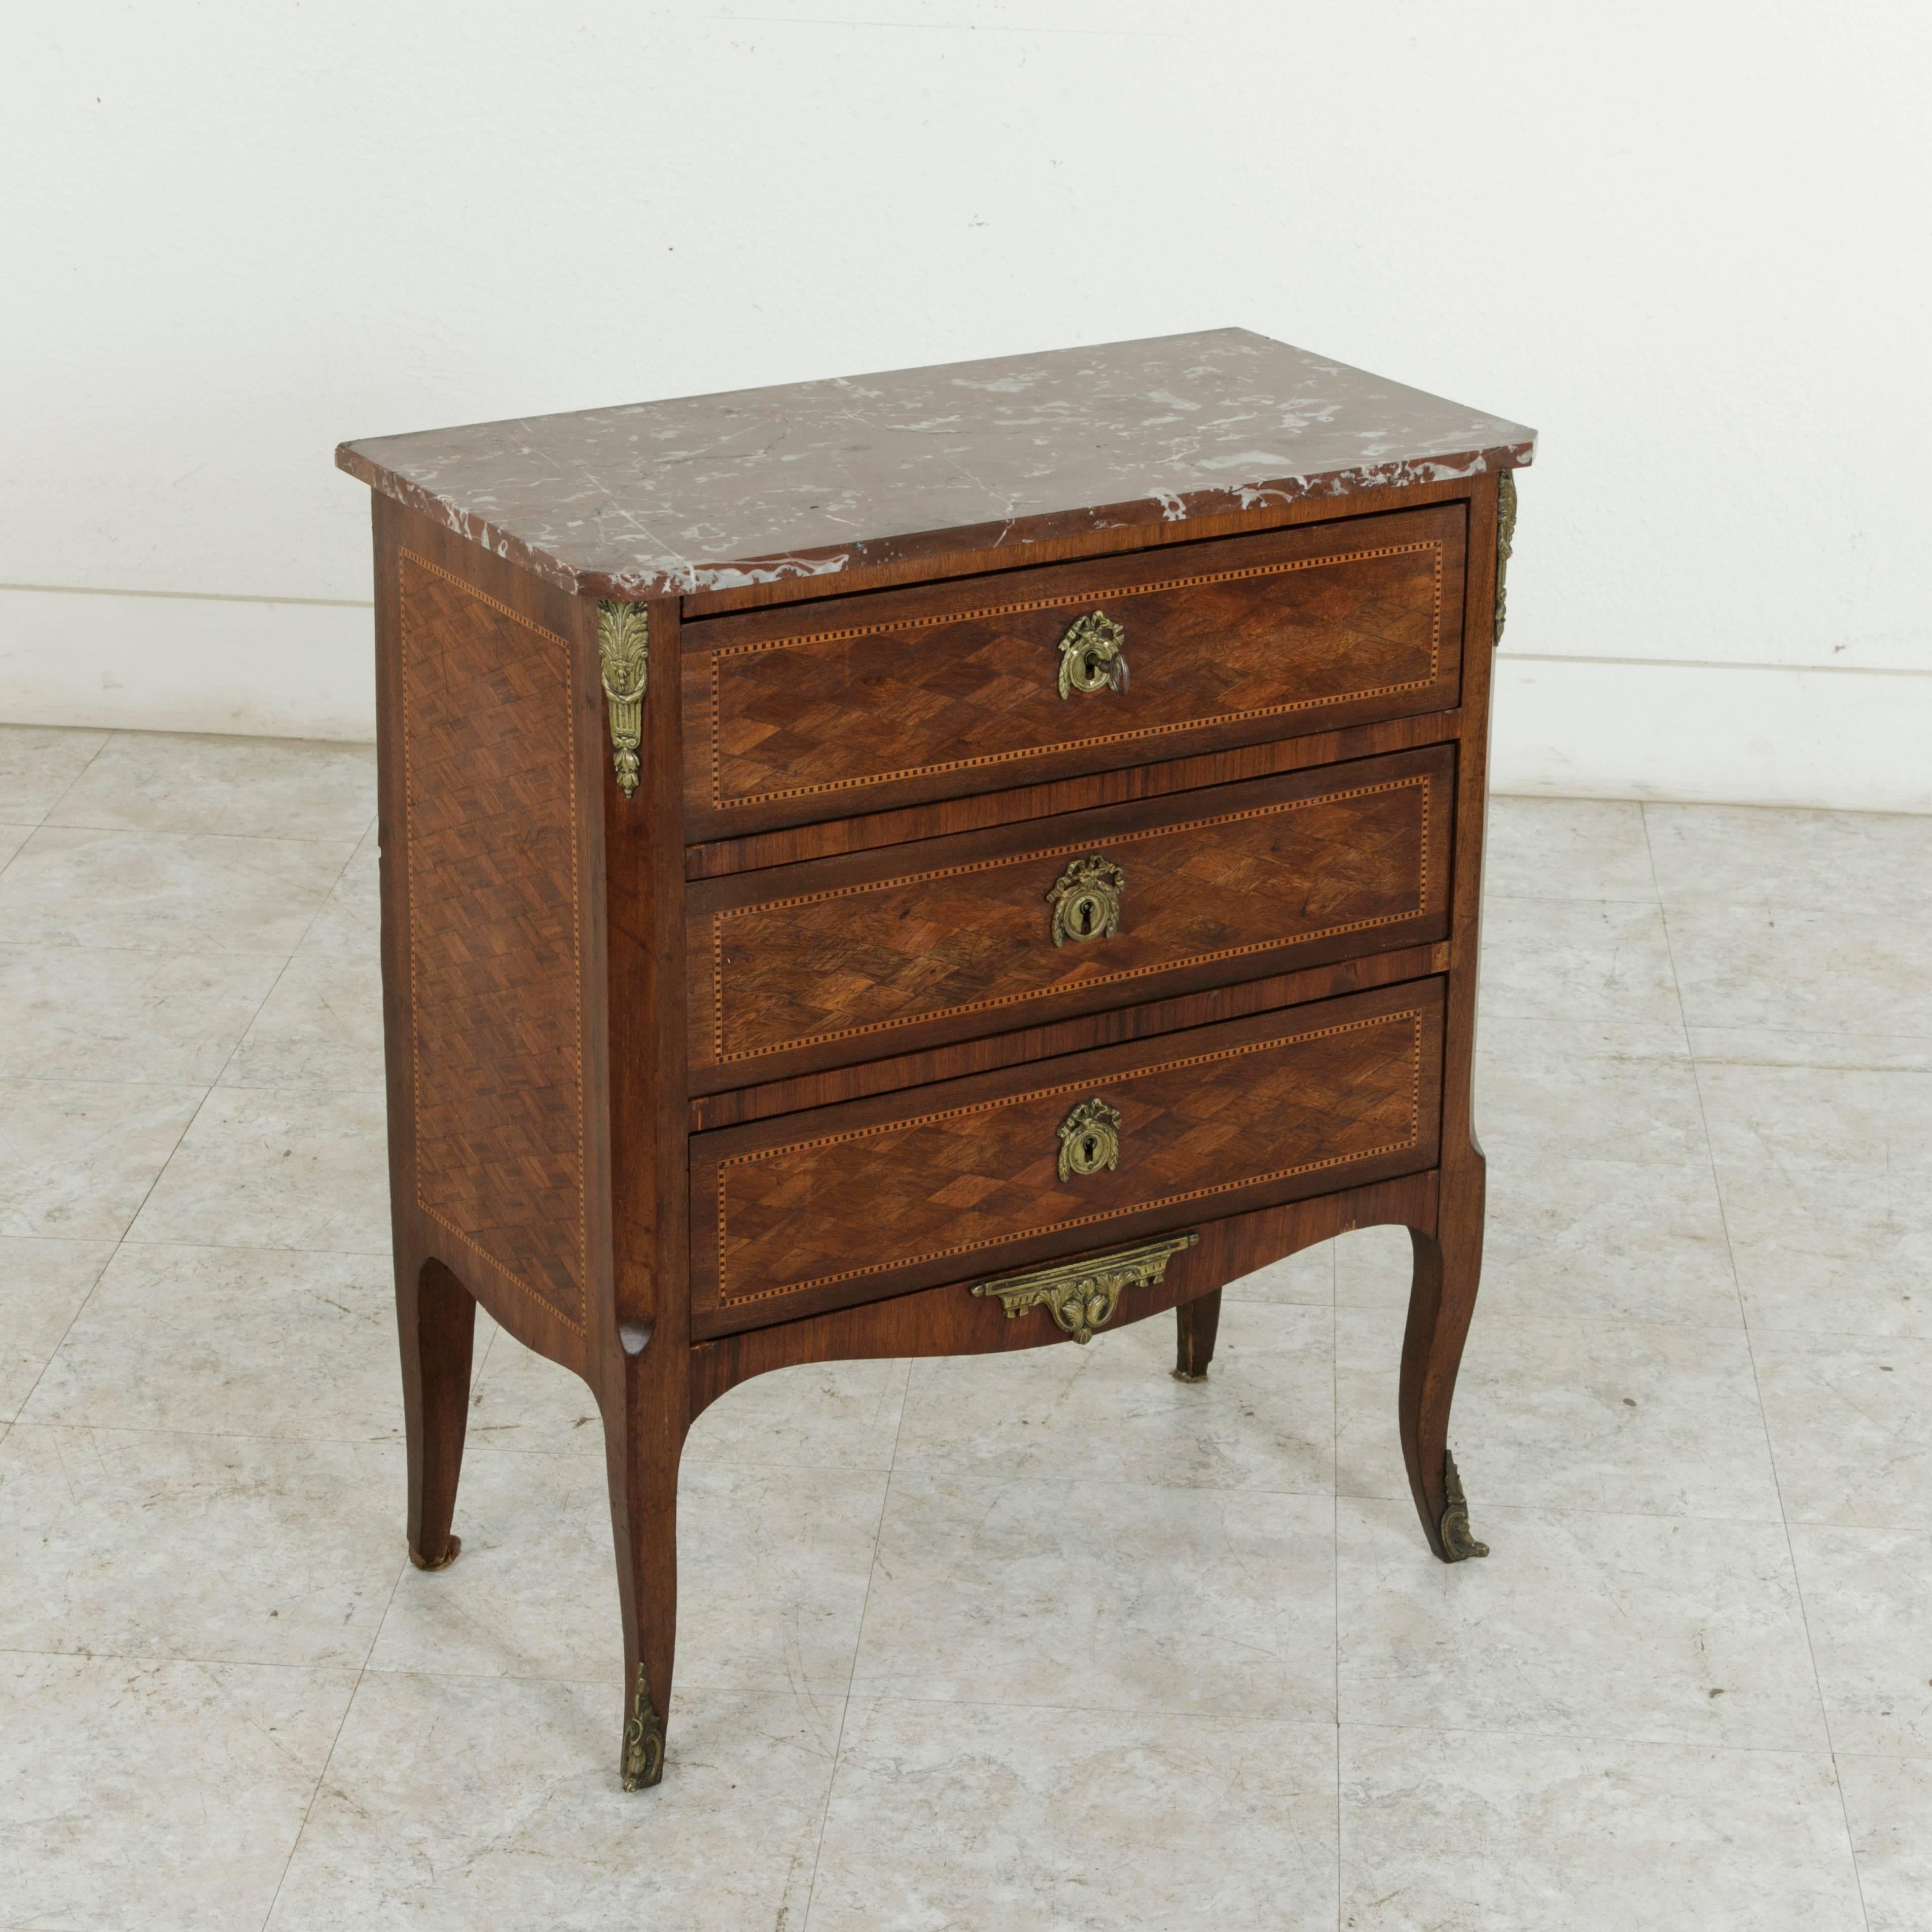 This small-scale French Louis XV-Louis XVI Transition style commode or chest features rosewood marquetry in a geometric diamond pattern on the front and sides with a striated border of rosewood and ebonized pear wood. Three drawers of dovetail